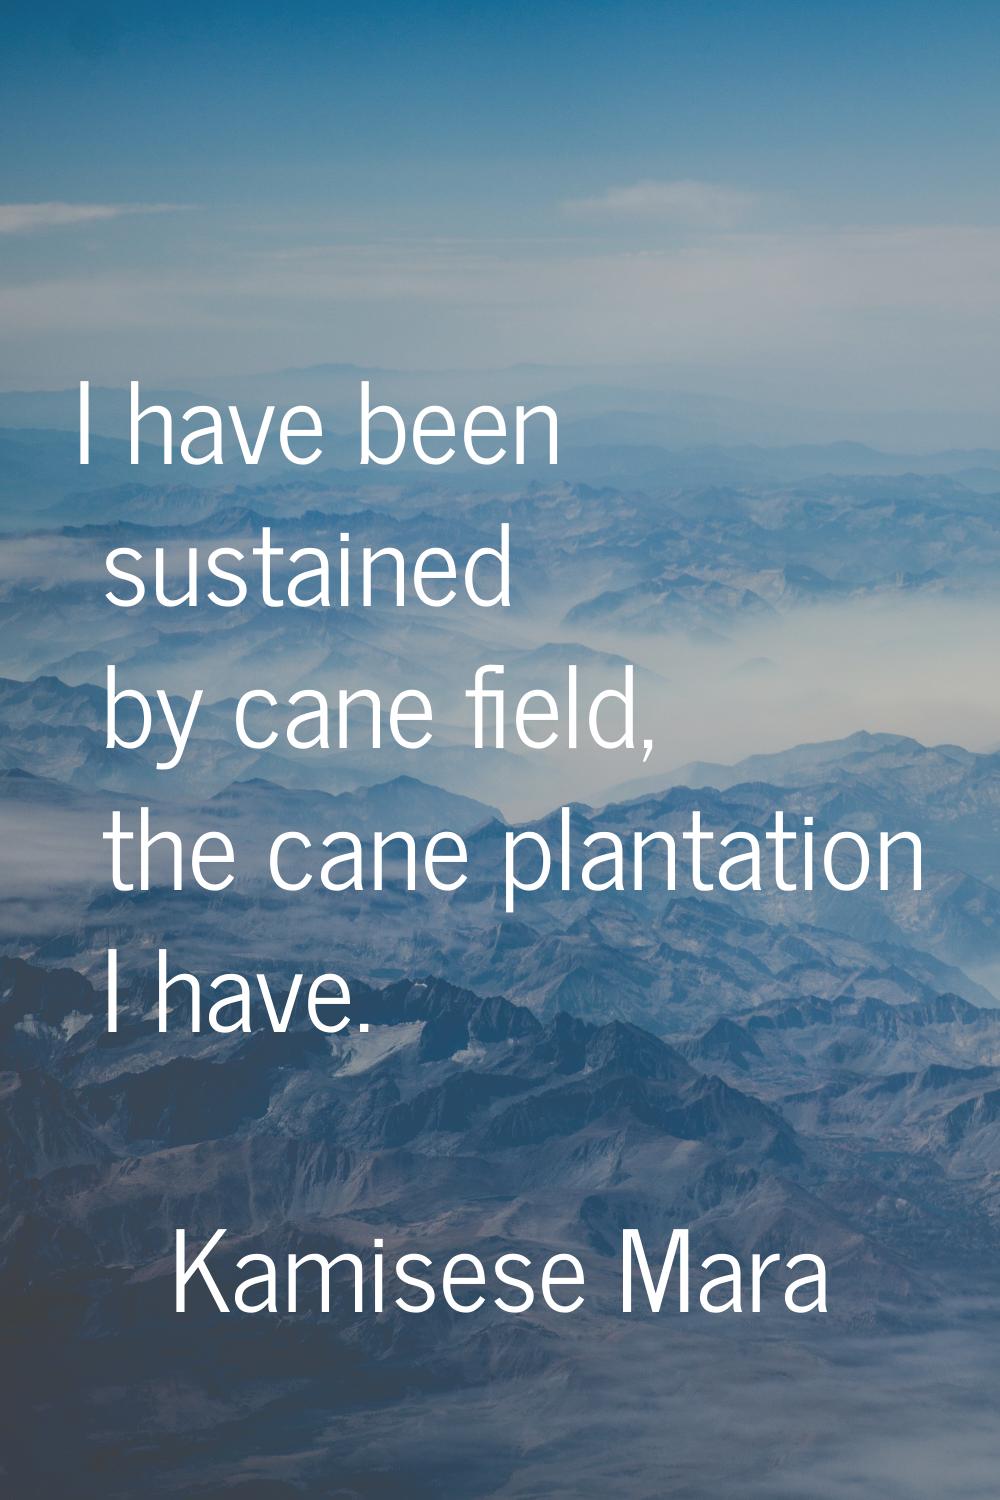 I have been sustained by cane field, the cane plantation I have.